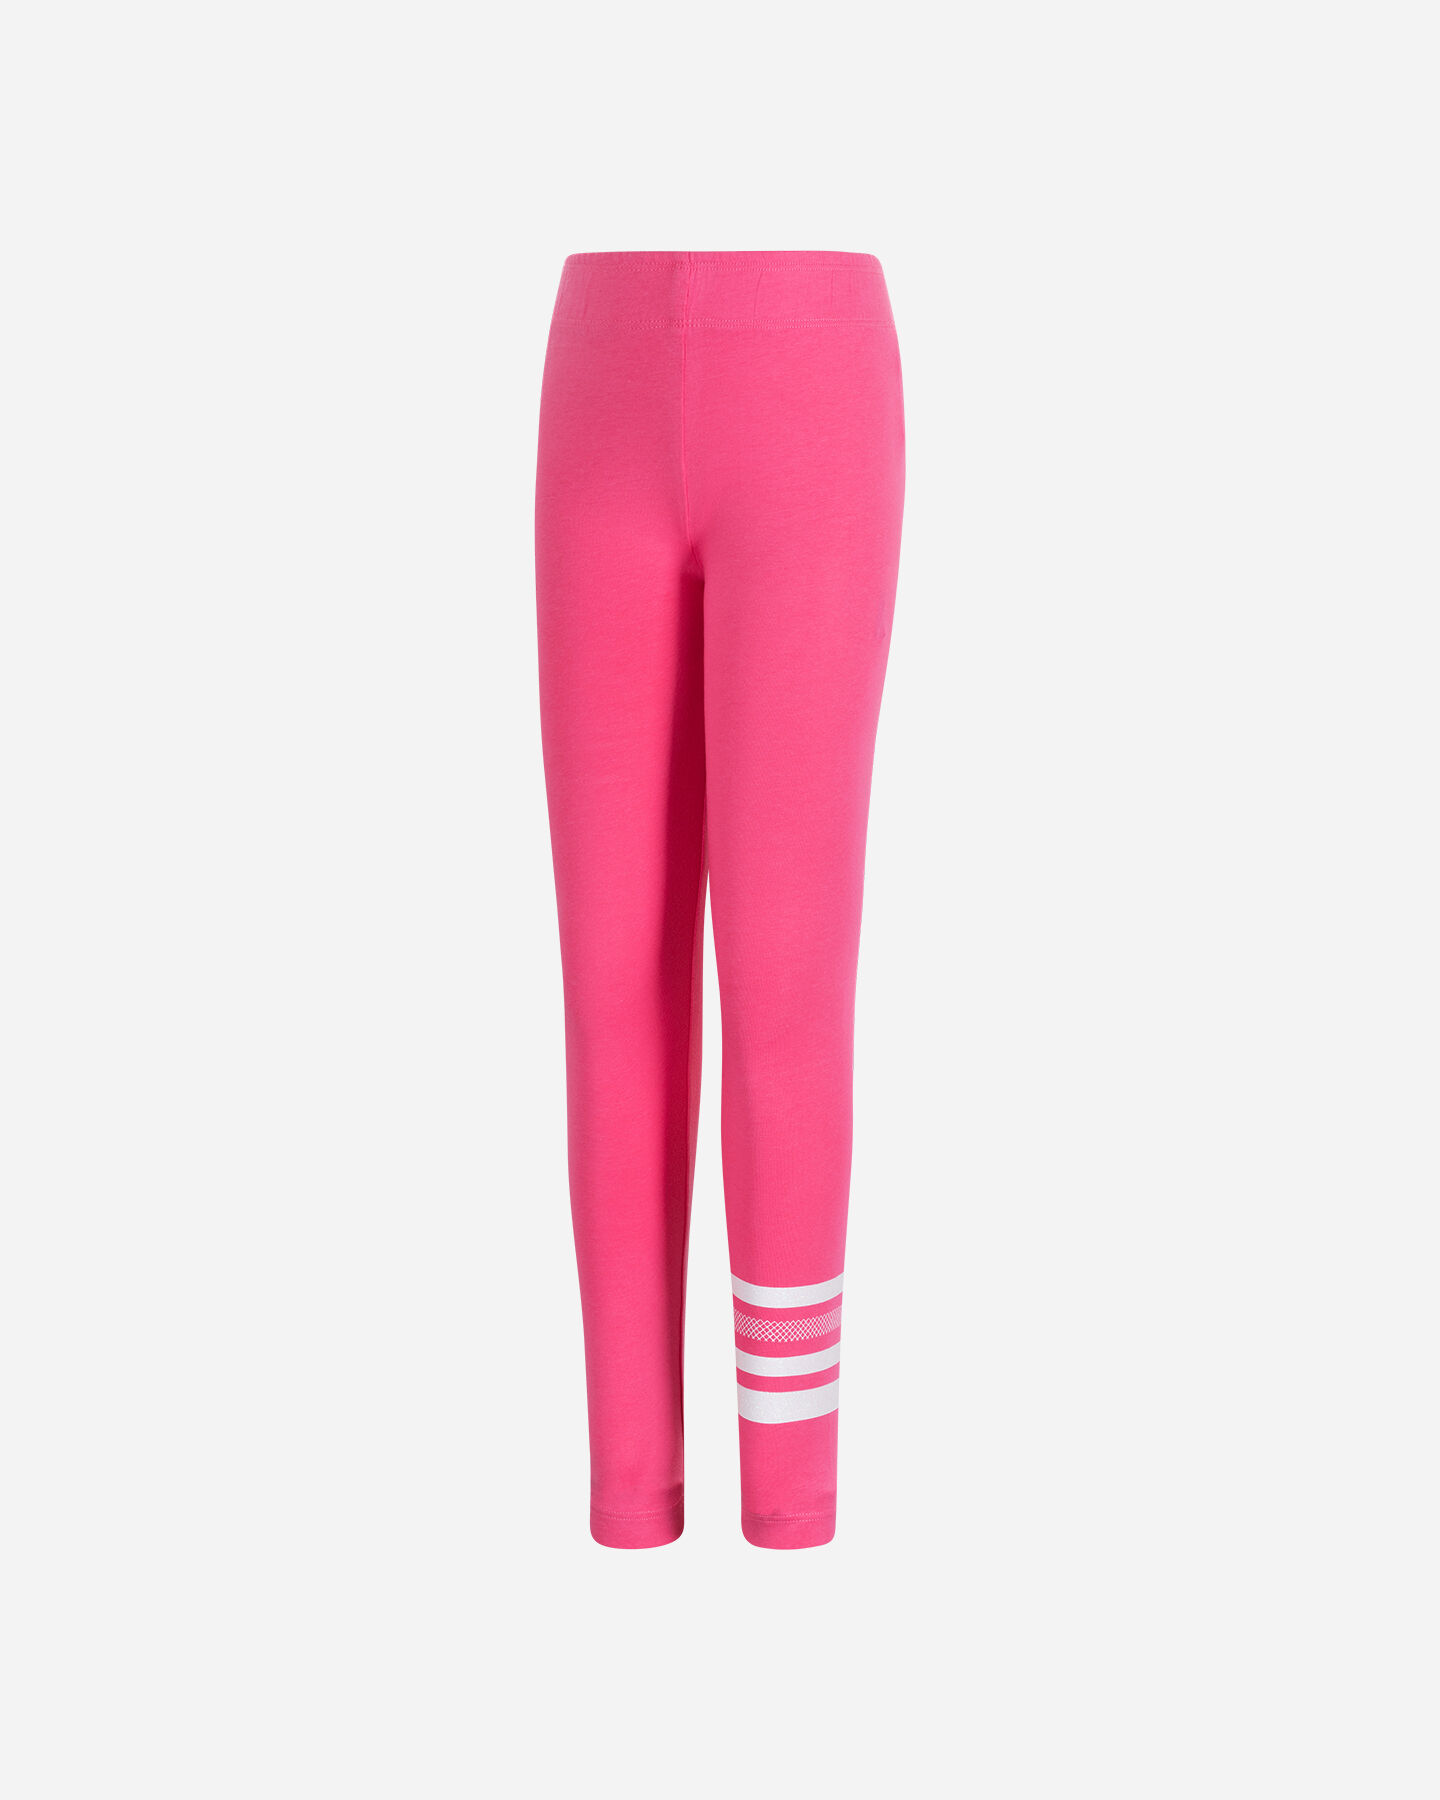  Leggings ADMIRAL BASIC SPORT JR S4119939|400|4A scatto 0